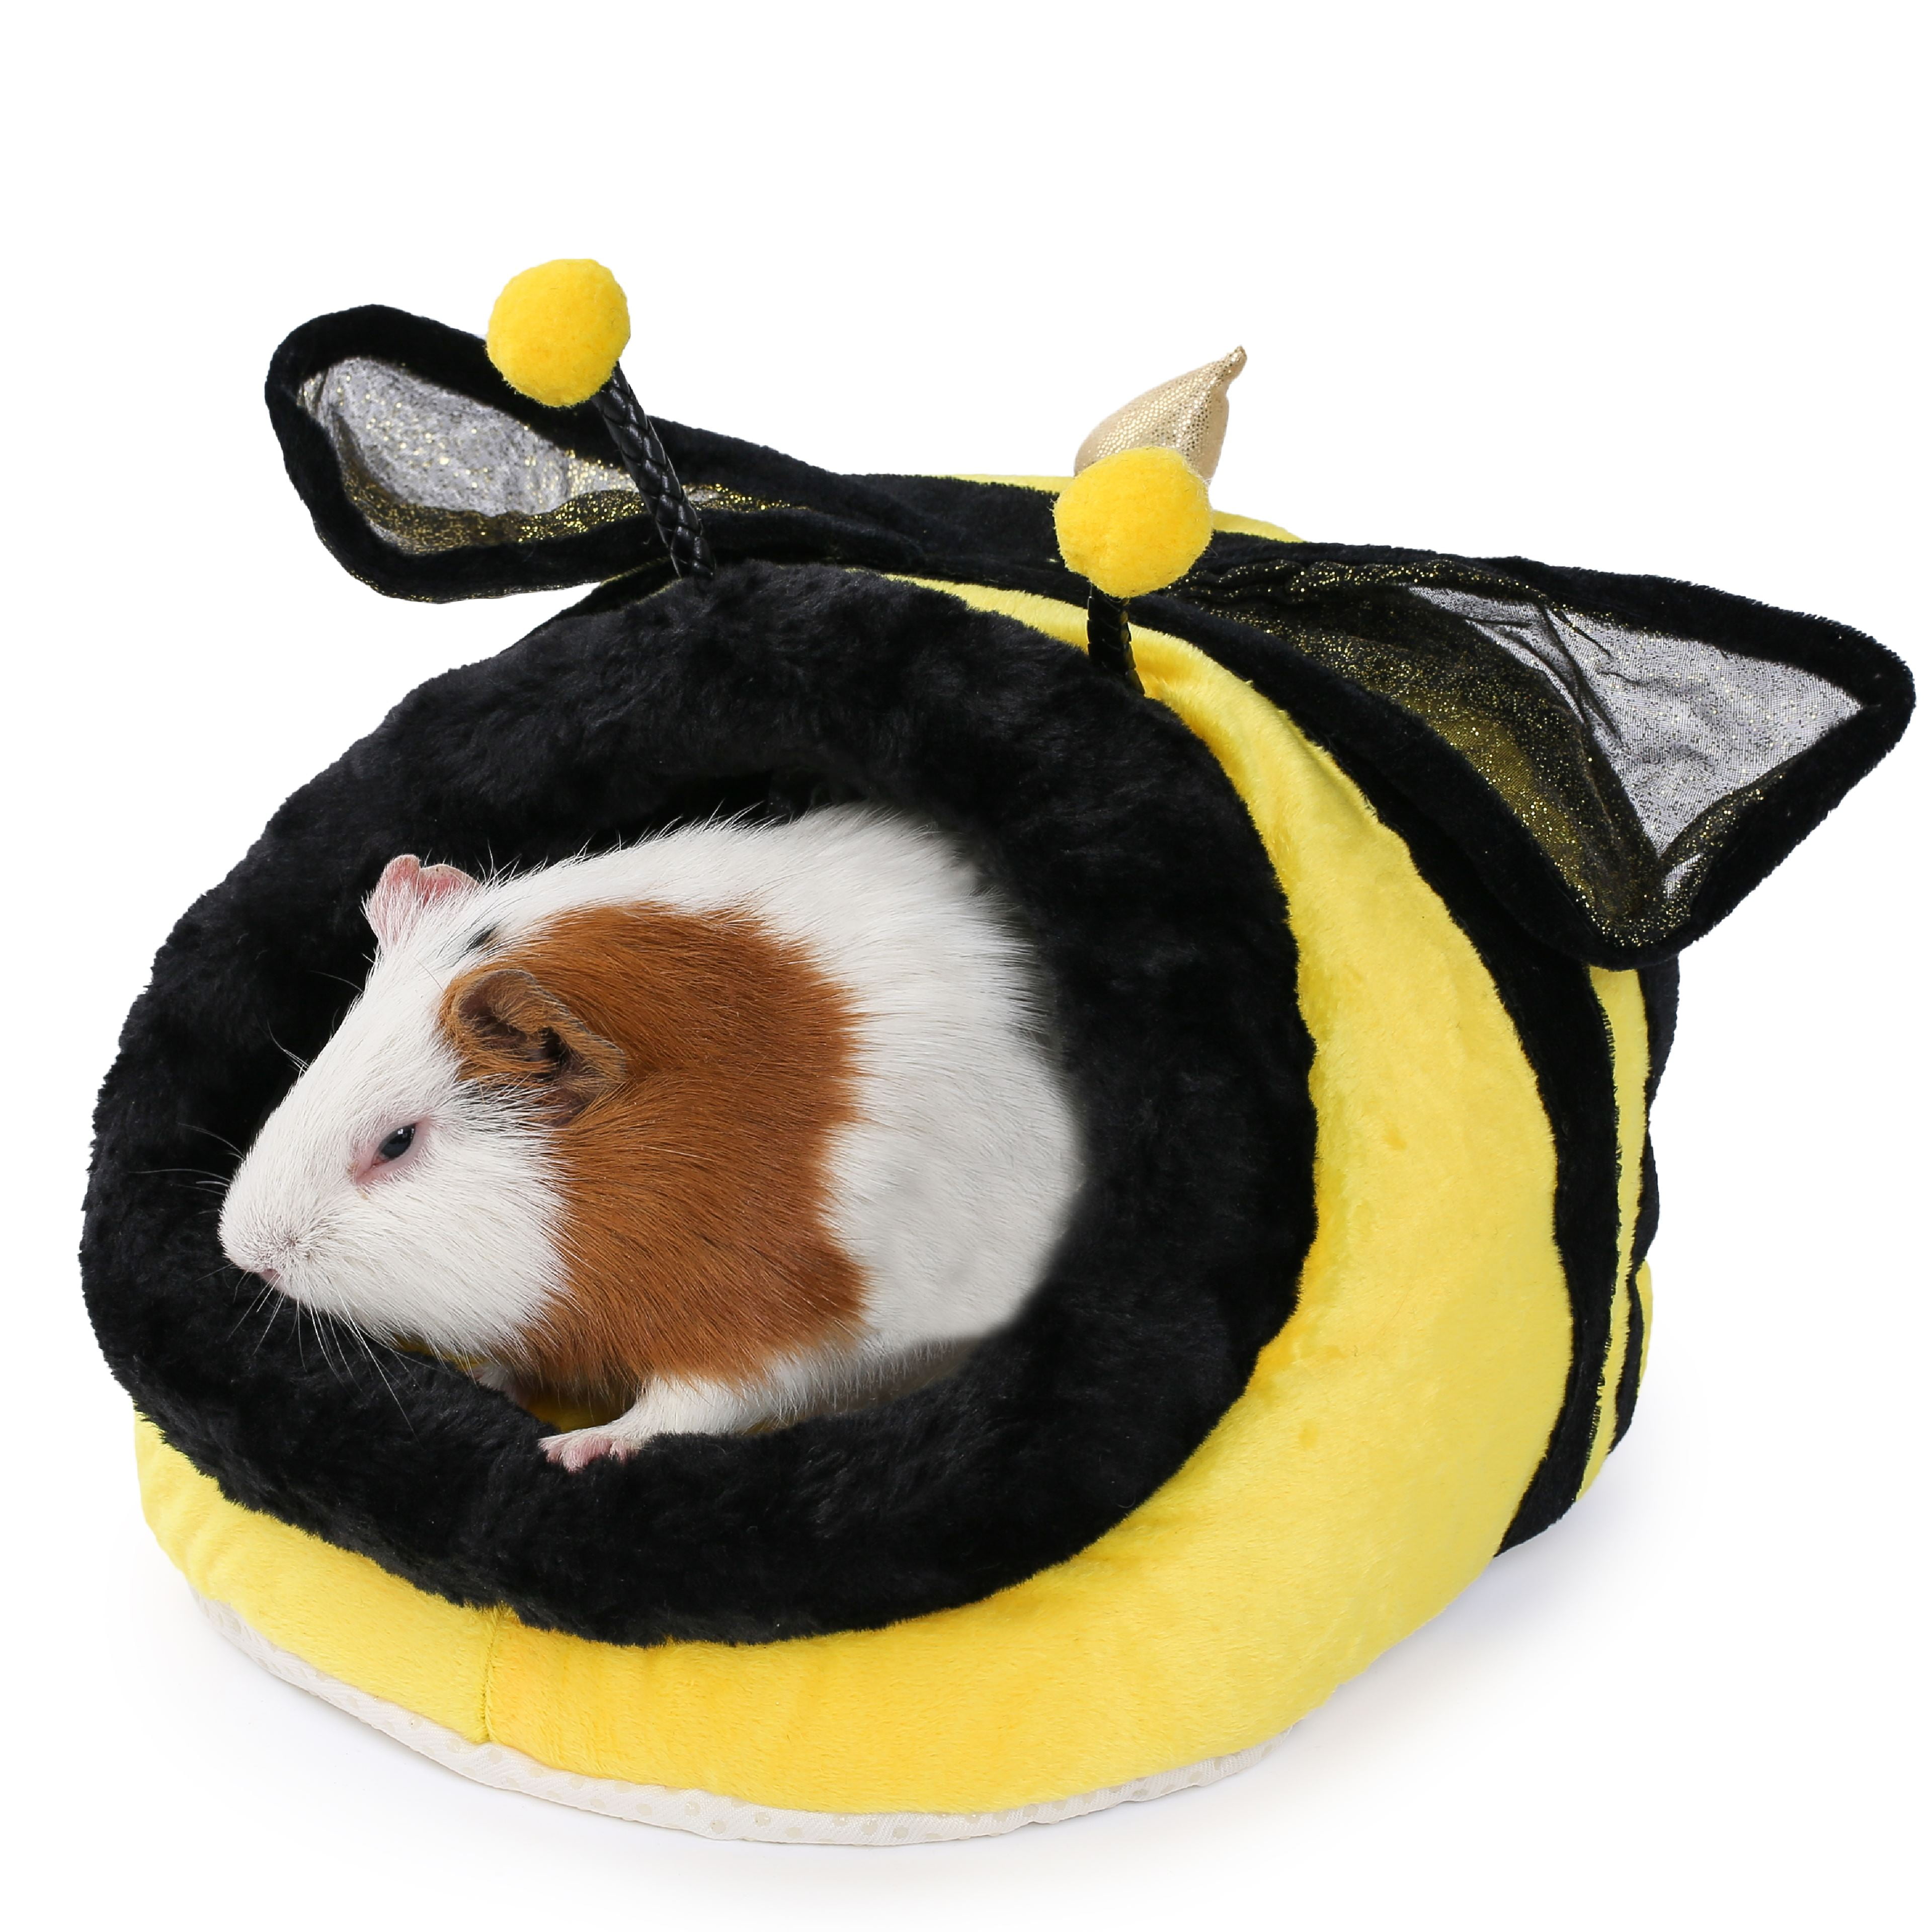 JanYoo Hamster Carrier Portable Travel Bag Small Animal Pouch for Hedgehog Rat Sugar Glider 